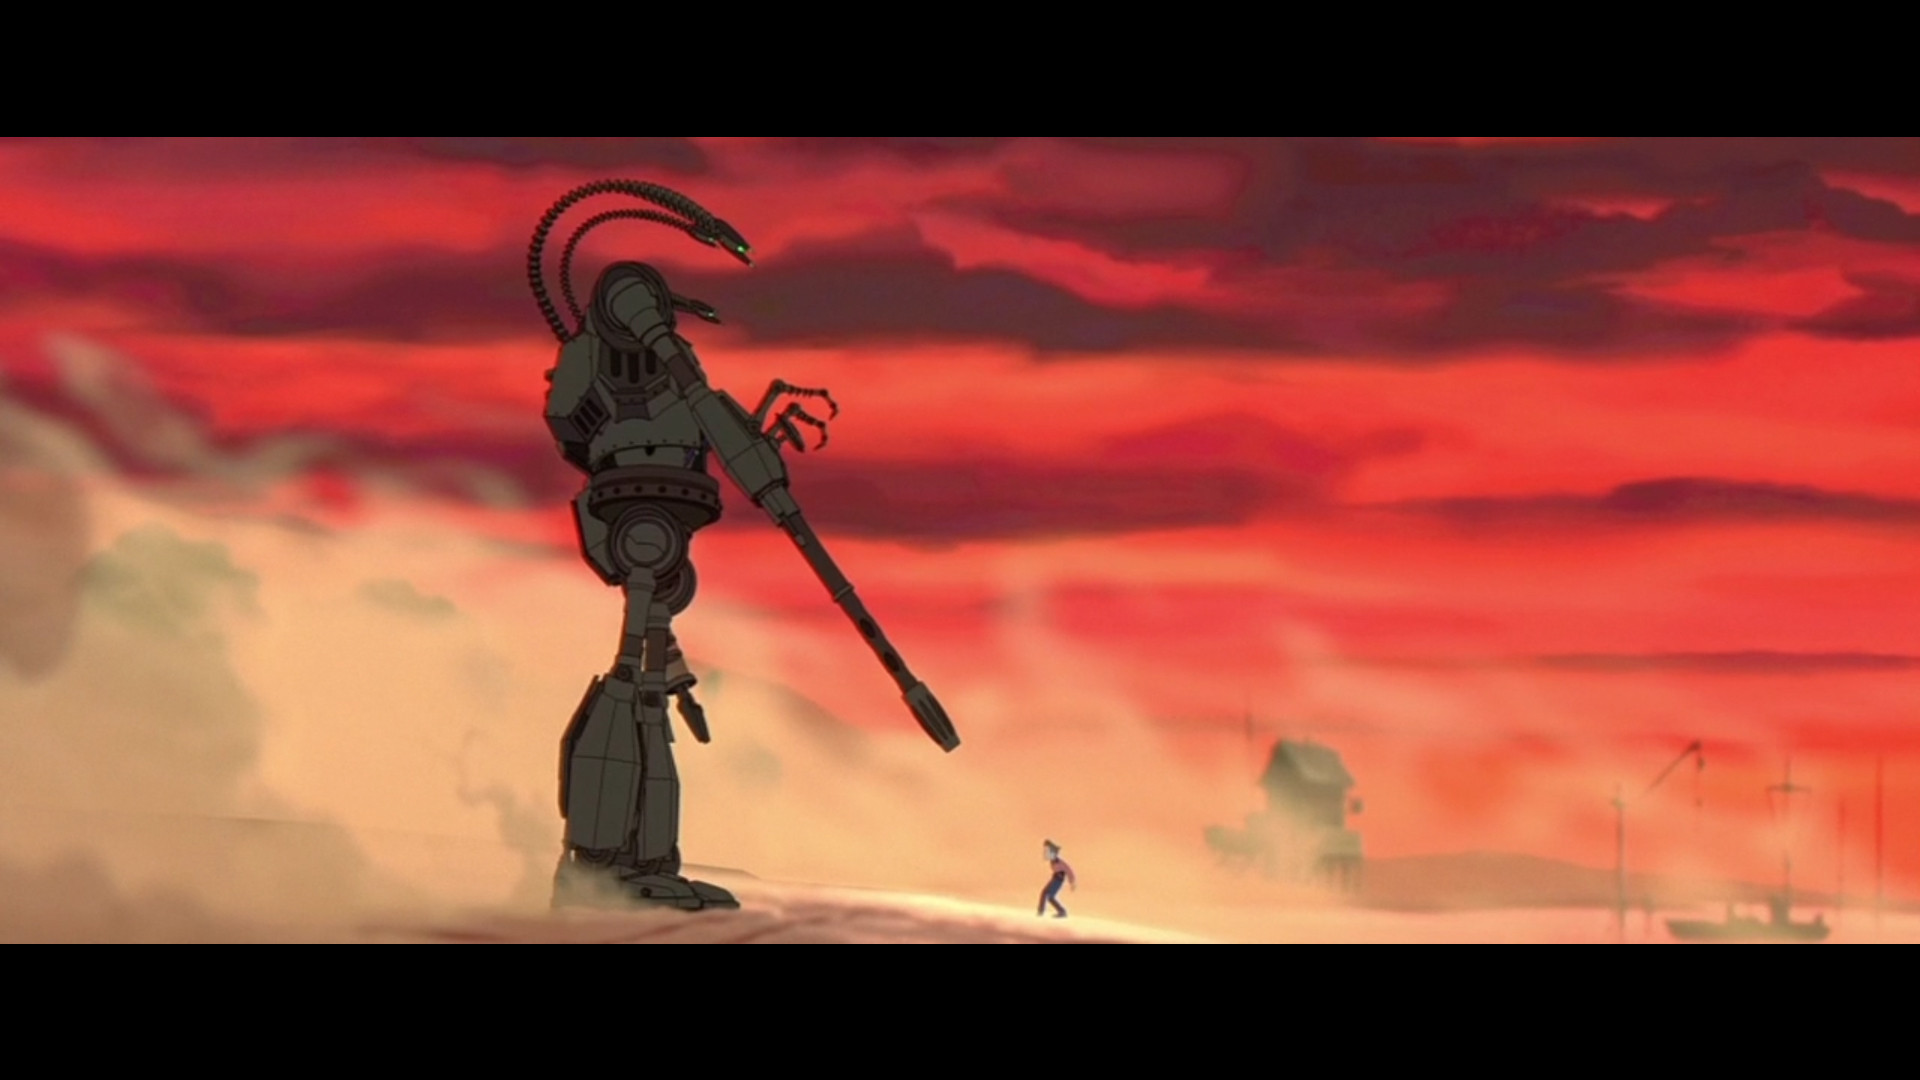 Couldnt find this frame from The Iron Giant so heres a 1080p screen